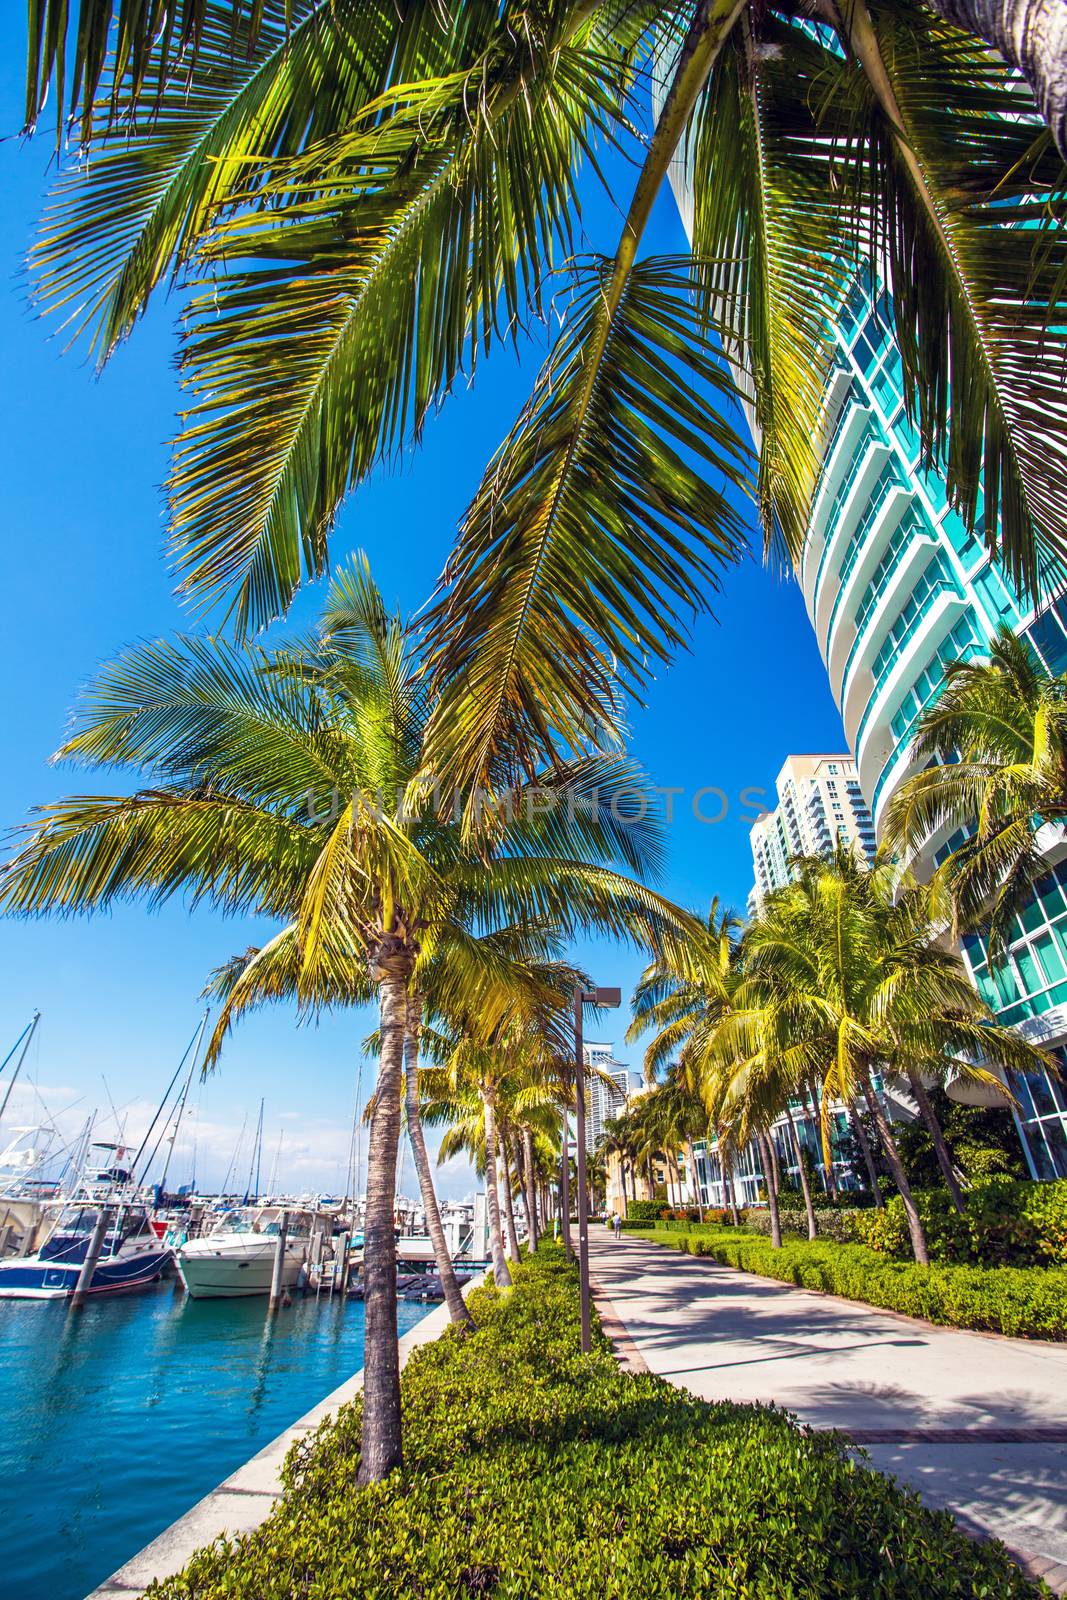 View of the marina in Miami Florida by Makeral